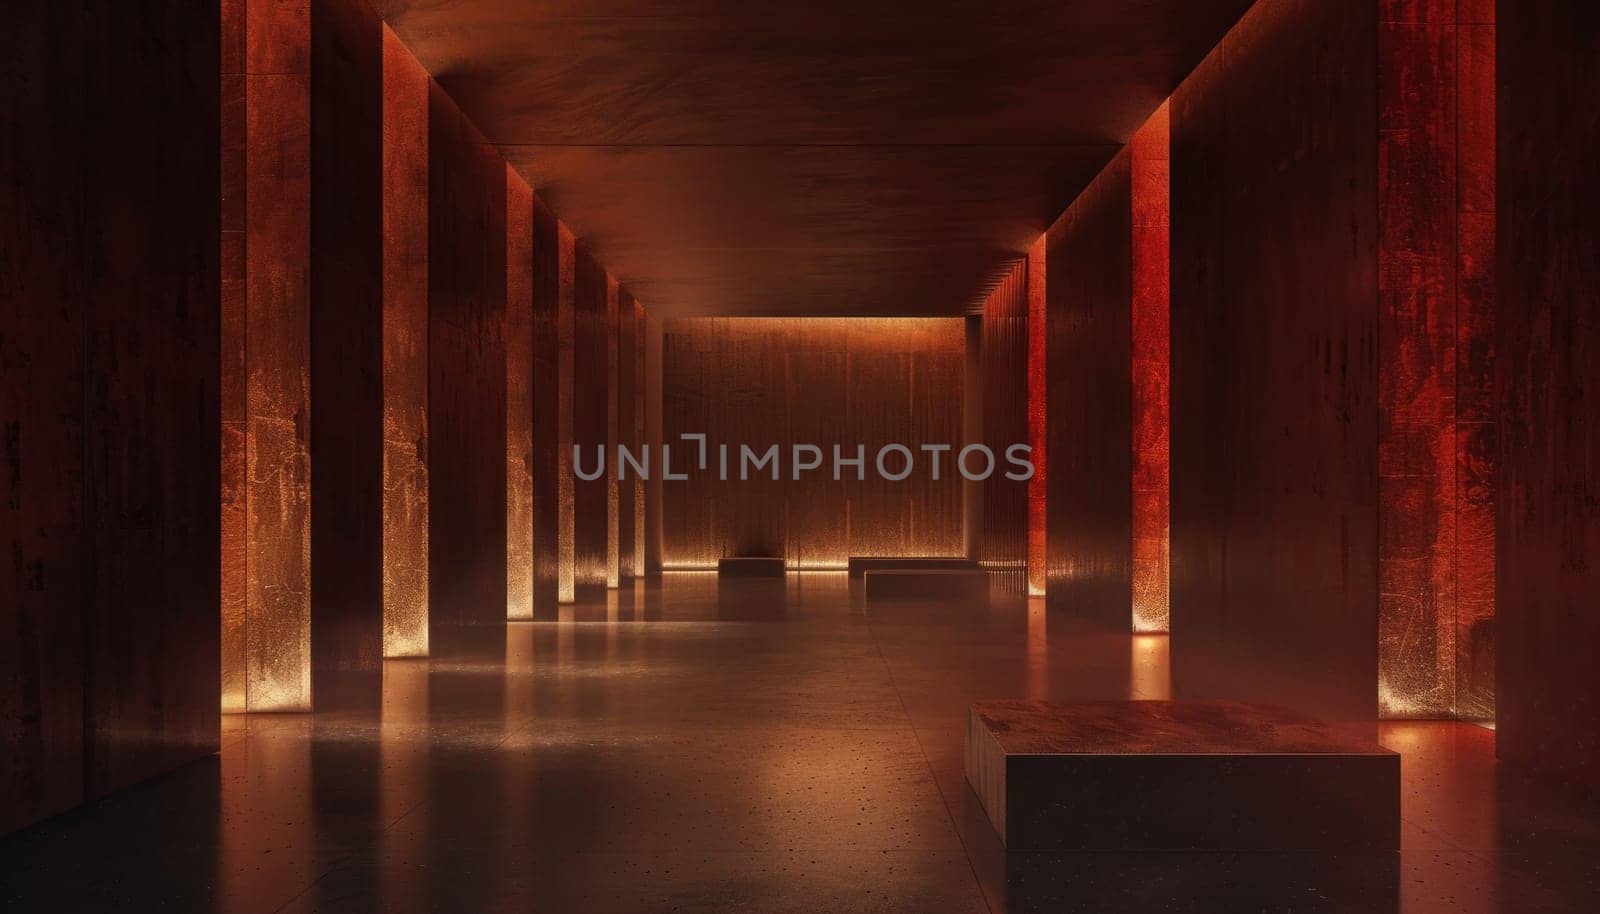 Mysterious hallway with red lights and bench in the middle urban exploration and adventure concept